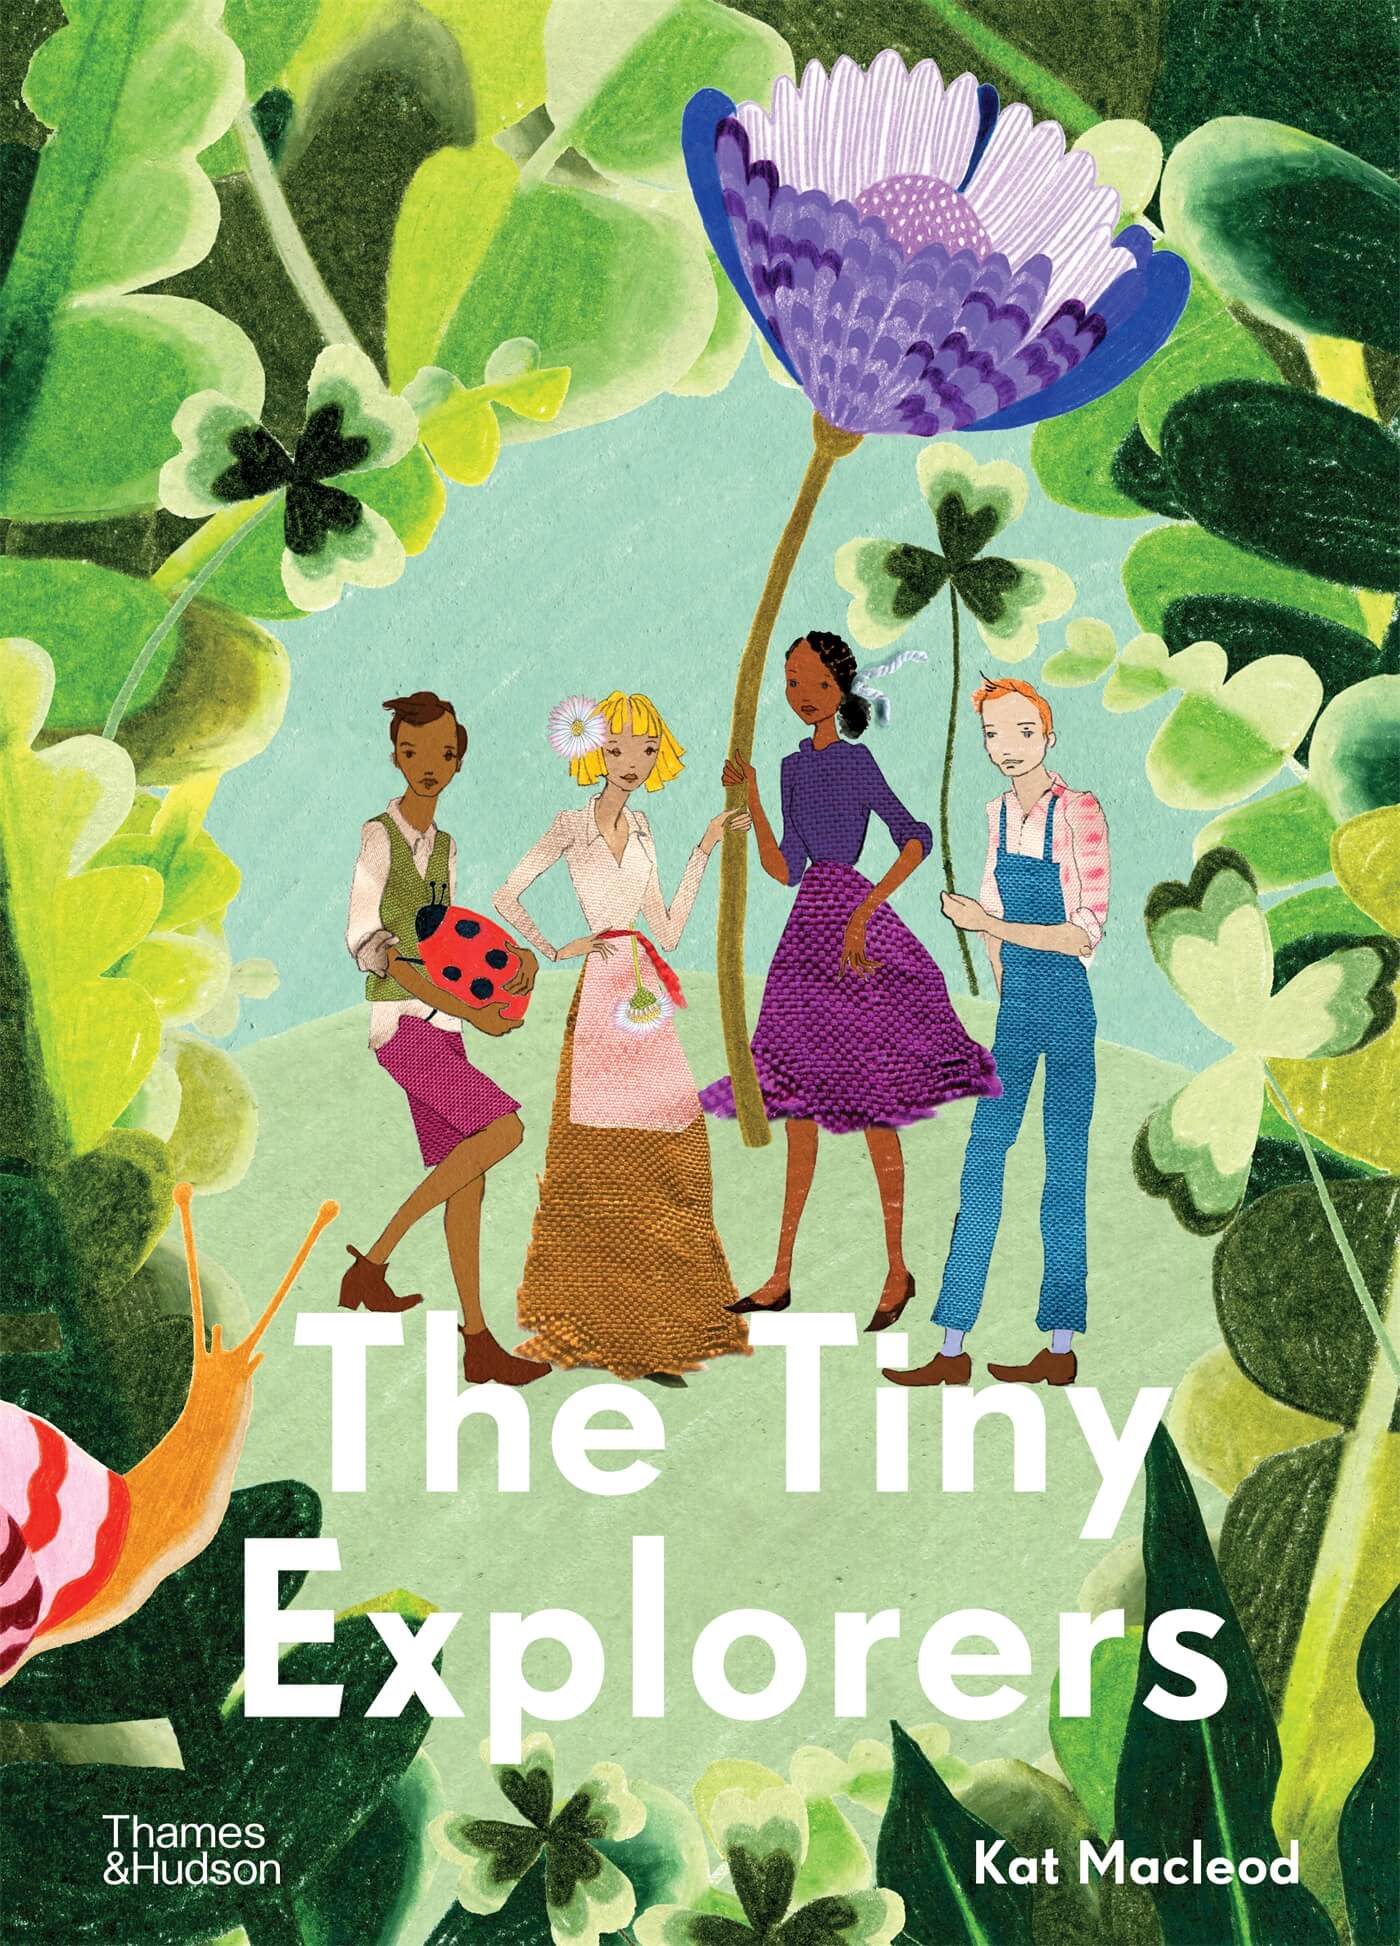 Coloured, illustrated book cover of plants, garden animals and four figures in the centre. Mainly illustrated in greens with pops of bright colours. Title displayed on bottom of cover in white, bold, sans serif font